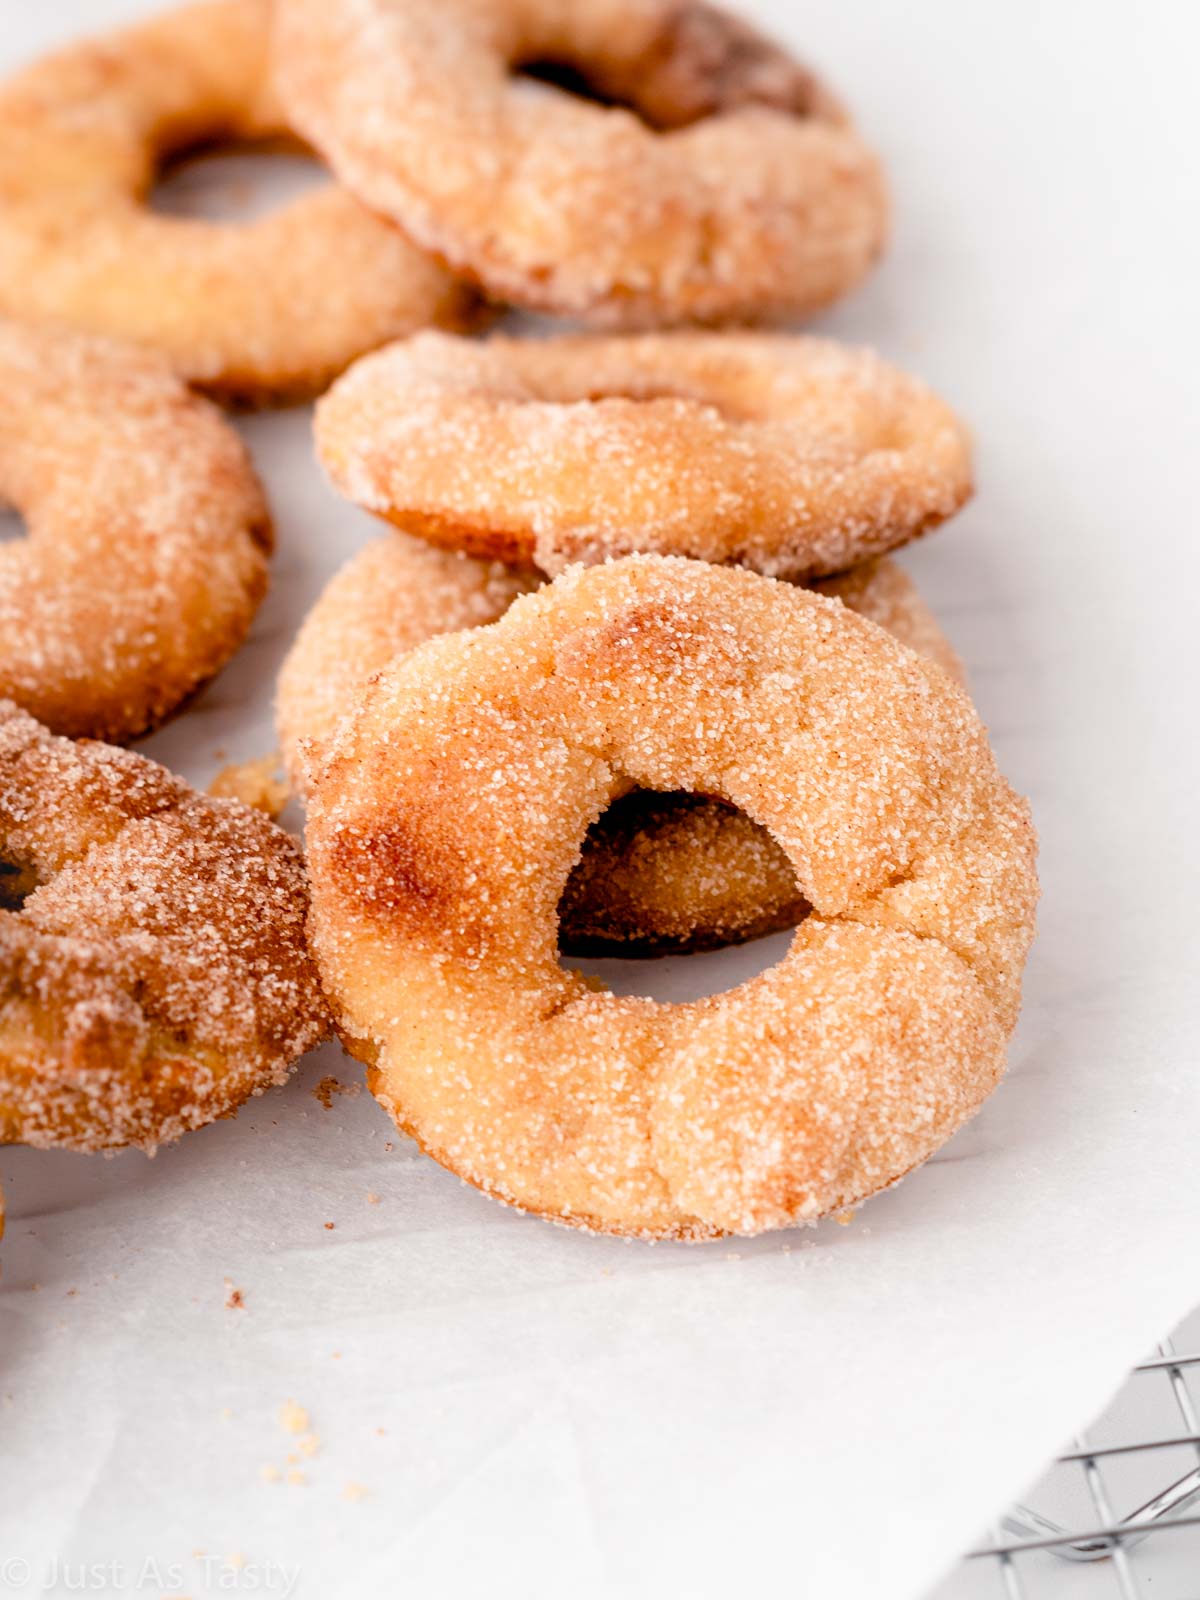 Close-up of an apple cider donut.